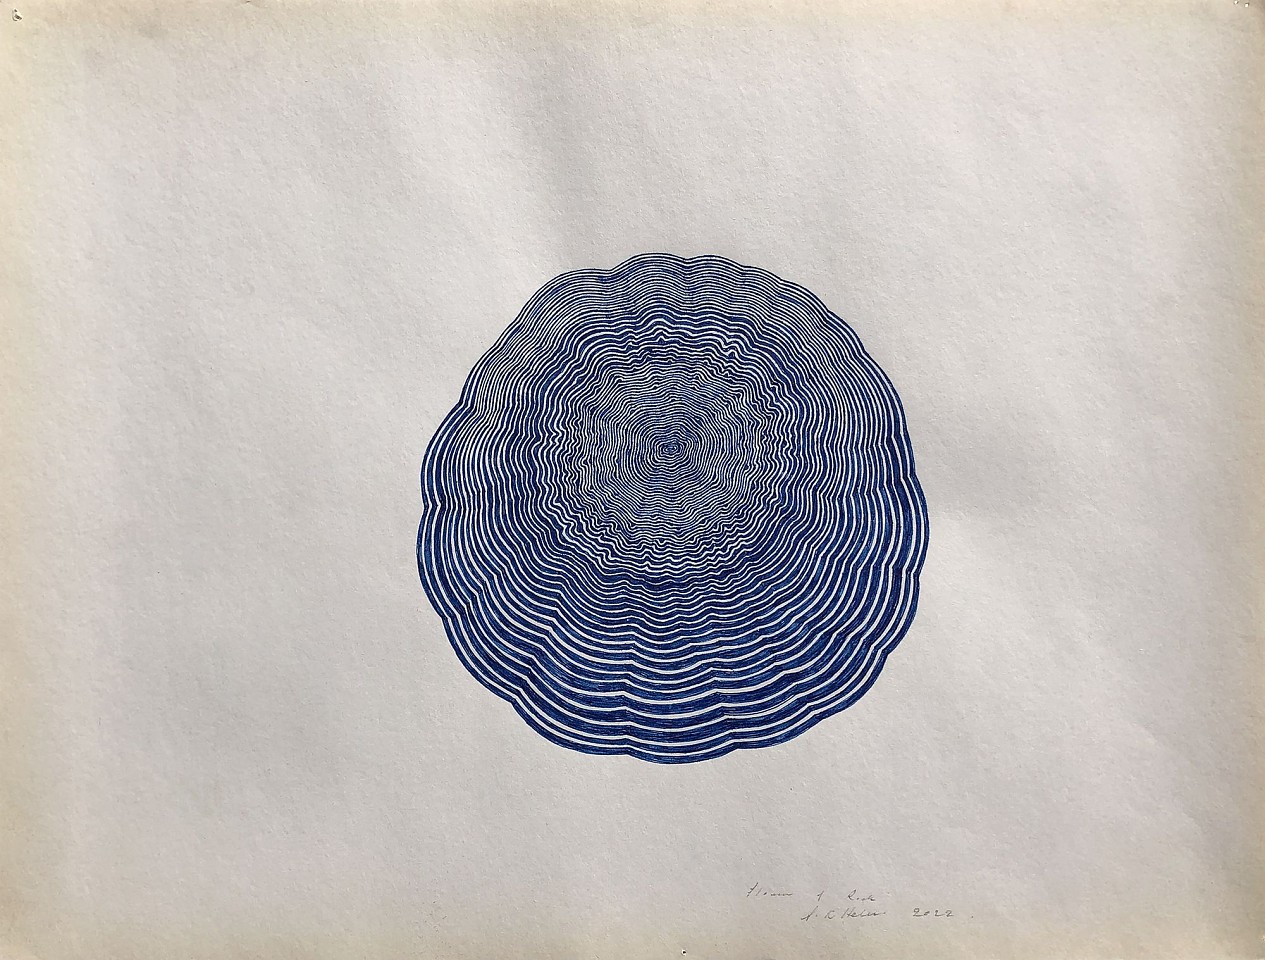 Stewart Helm, Flower and Rock, 2022
Blue ink on paper, 13.5"x 17.5"
SH-654
Price Upon Request